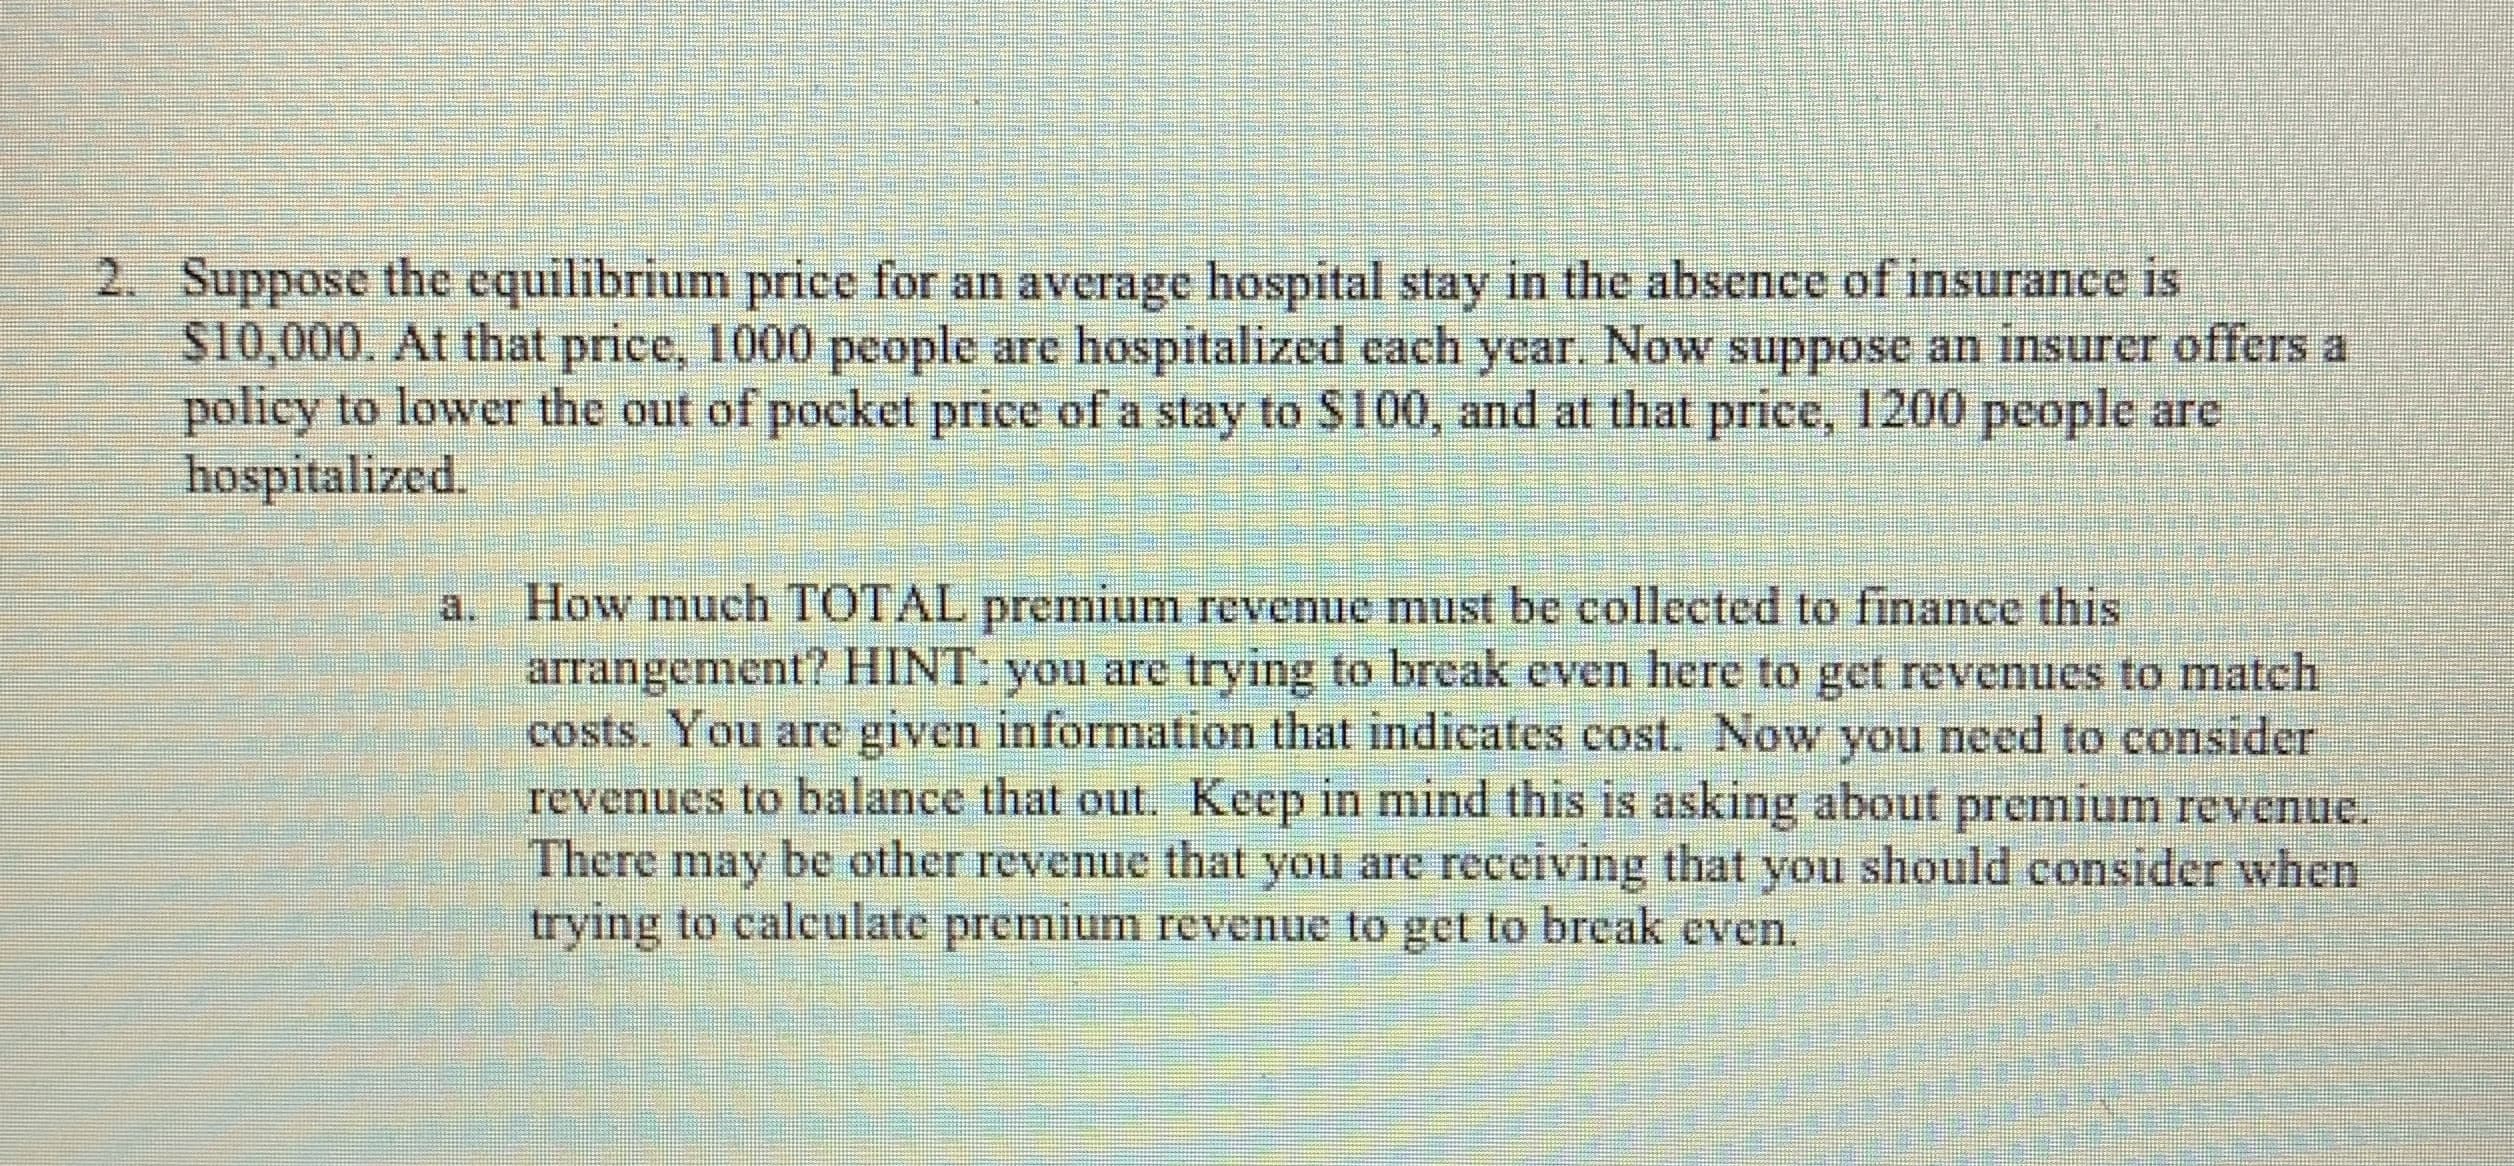 2. Suppose the equilibrium price for an average hospital stay in the absence of insurance is
S10,000. At that price, 1000 people are hospitalized each year. Now suppose an insurer offers a
policy to lower the out of pocket price of a stay to S100, and at that price, 1200 pcople are
hospitalized.
How much TOTAL premium revenue must be collected to finance this
arrangement? HINT: you arc trying to brcak even here to get revenucs to match
costs. You are given information that indicates cost. Now you need to consider
revenues to balance that out. Keep in mind this is asking about premium revenue.
There may be other revenue that you are receiving that you should consider when
trying to calculate premium revenue to get to break even.
a.
